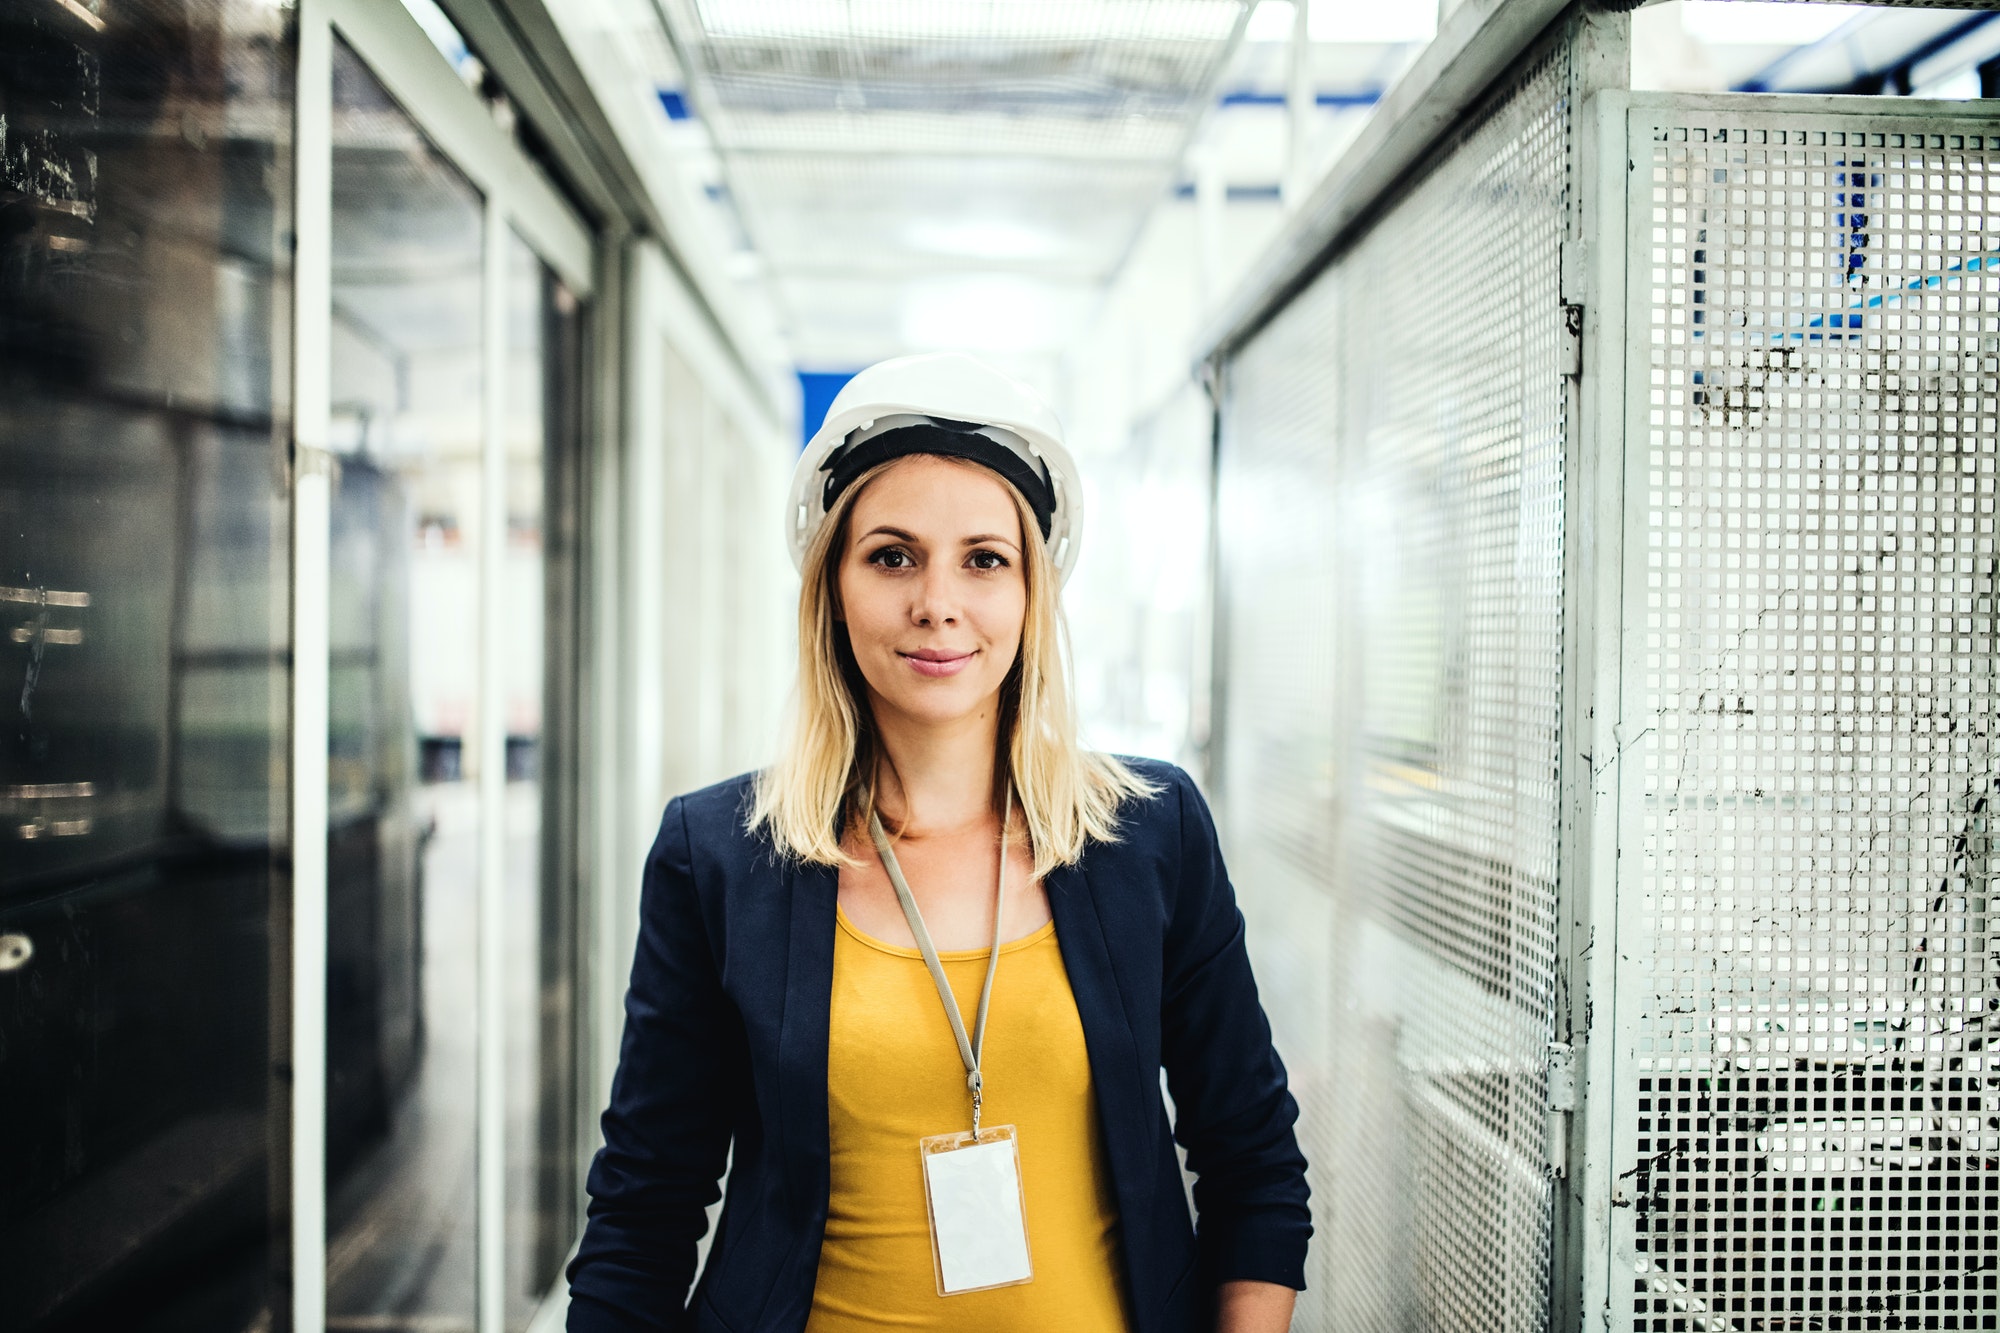 A portrait of an industrial woman engineer standing in a factory.